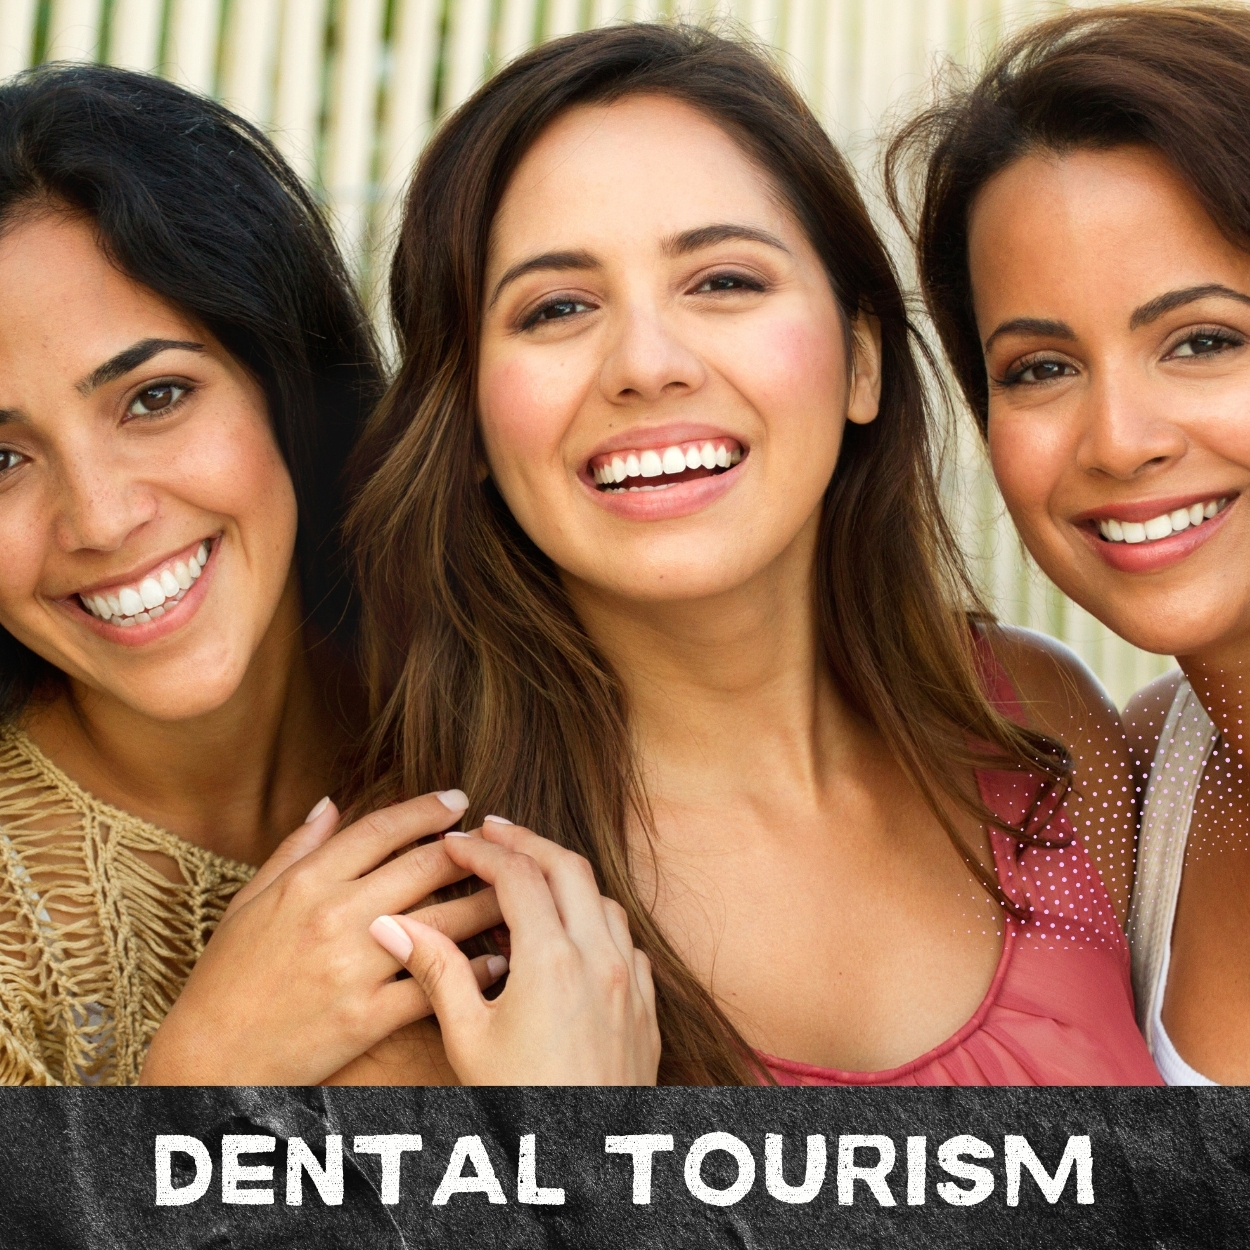 dental tourism mexico from canada reddit